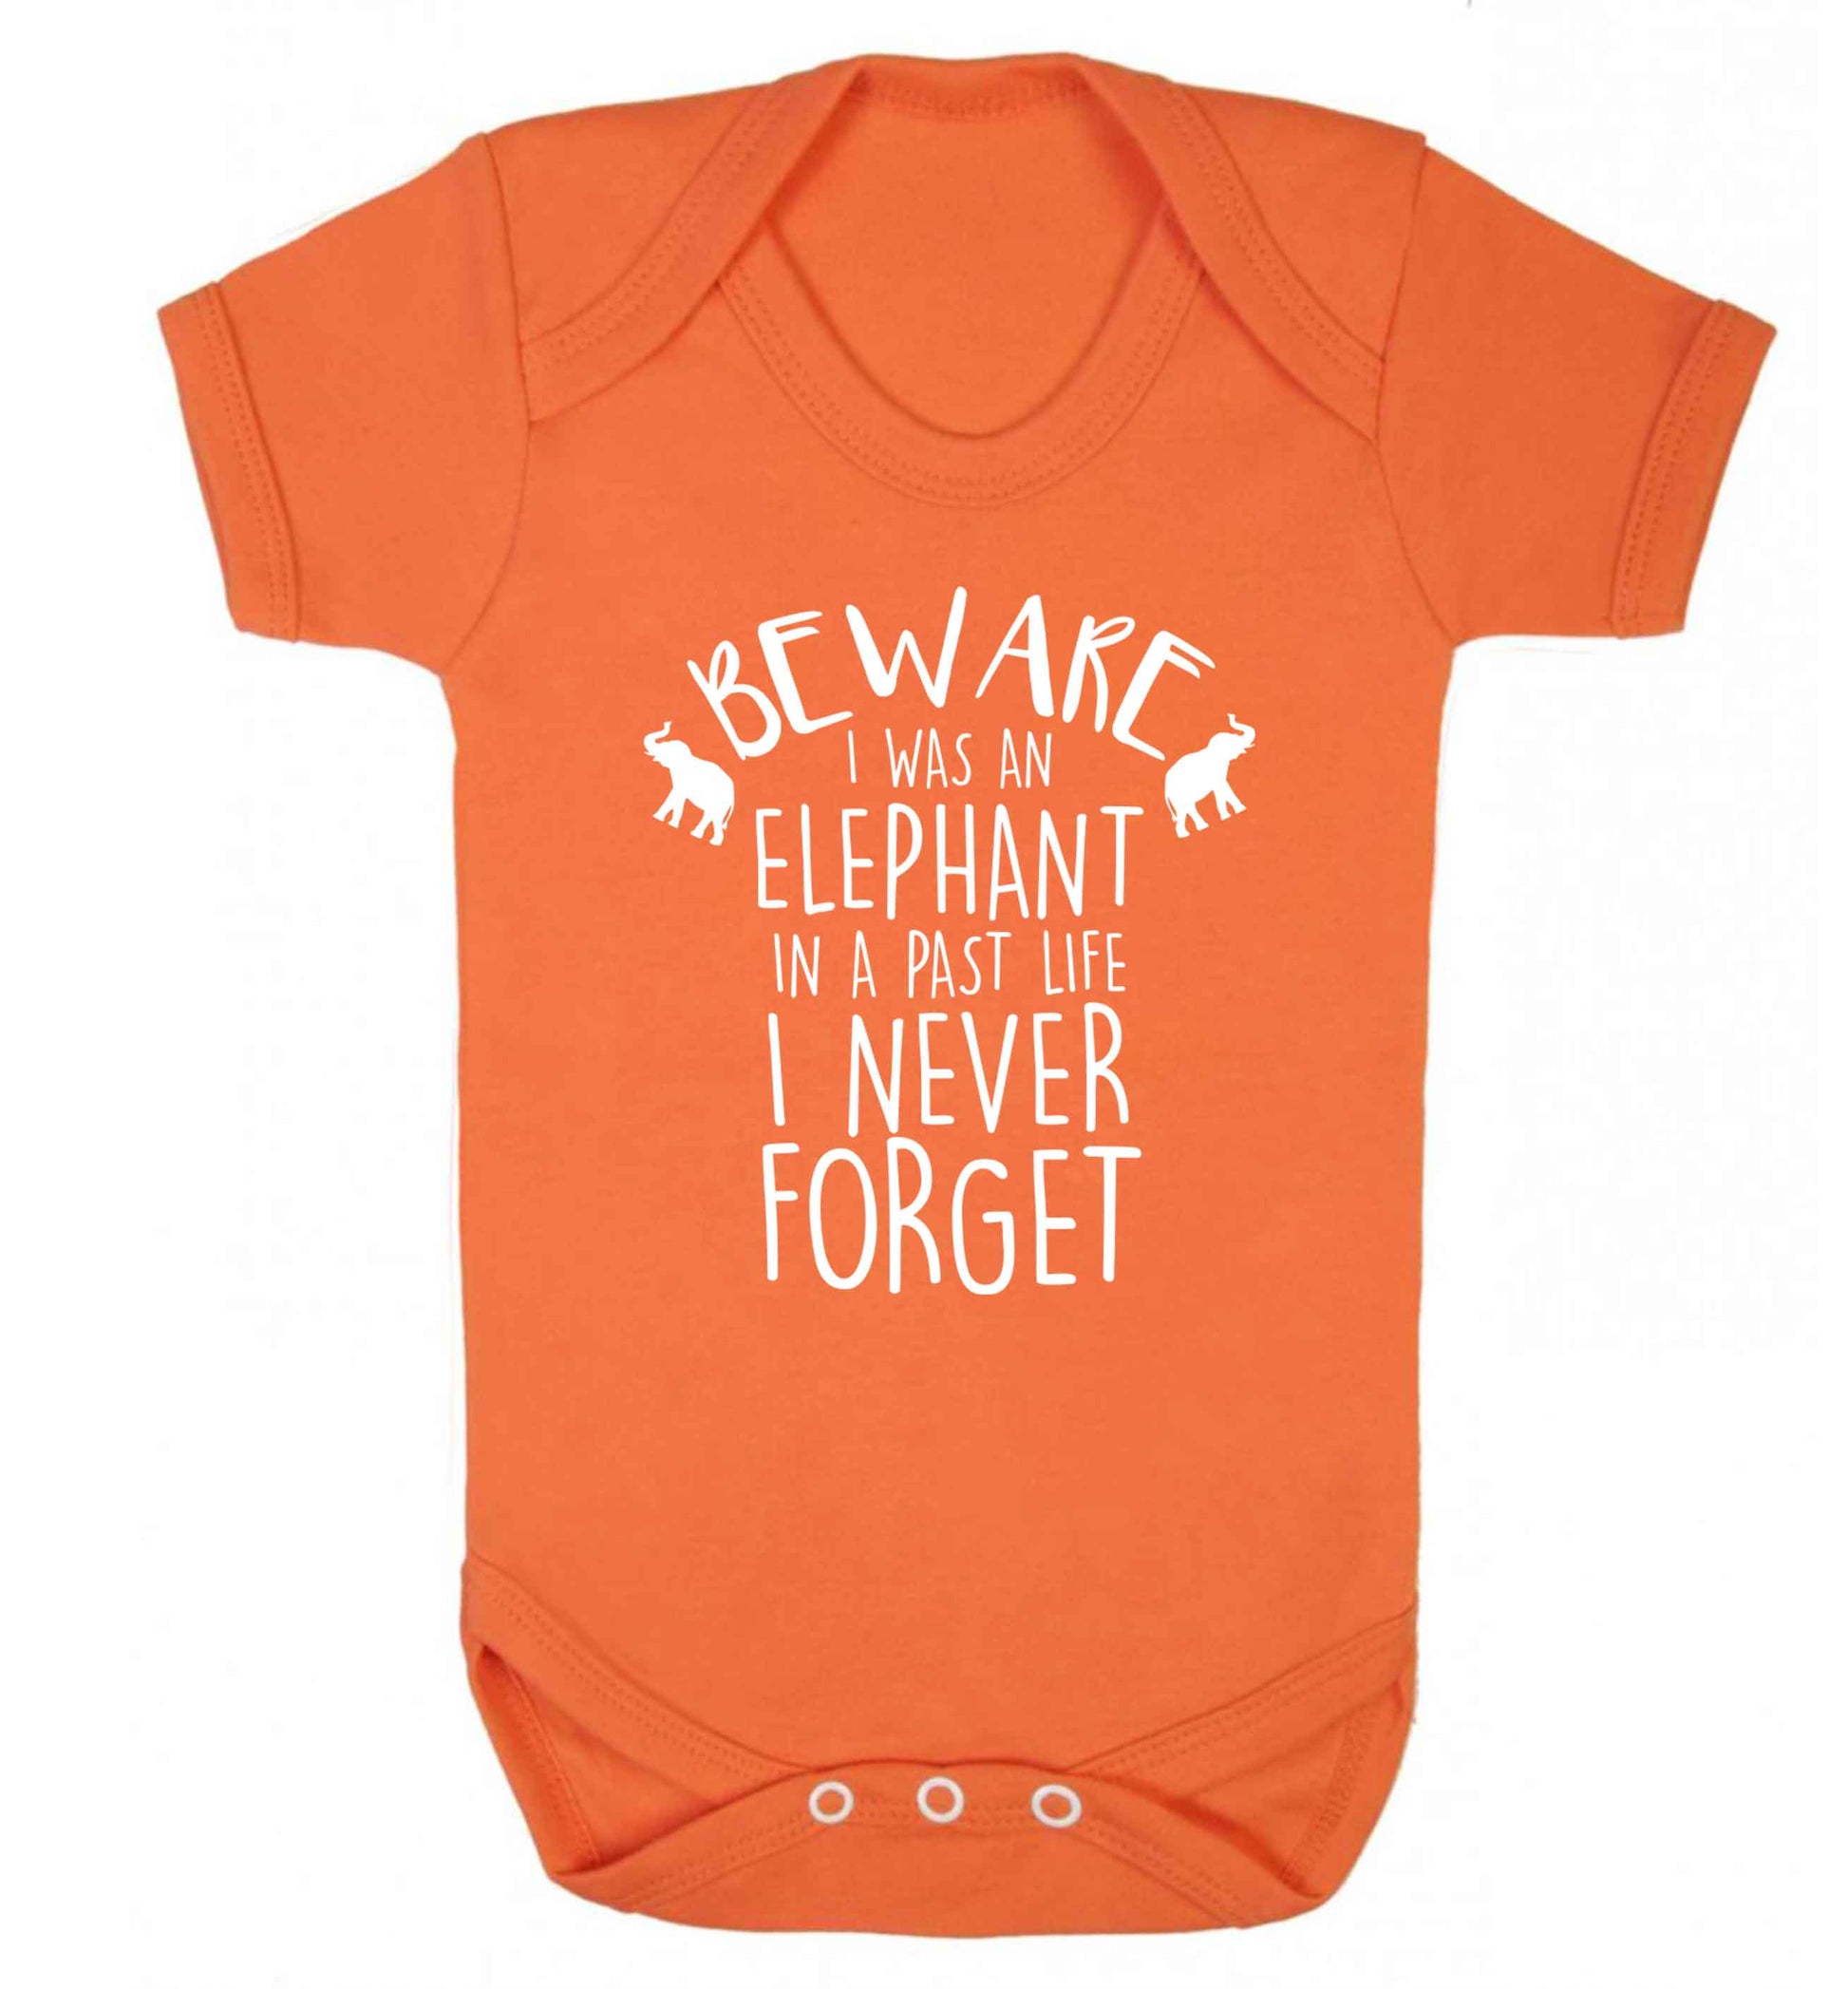 Beware I was an elephant in my past life I never forget Baby Vest orange 18-24 months